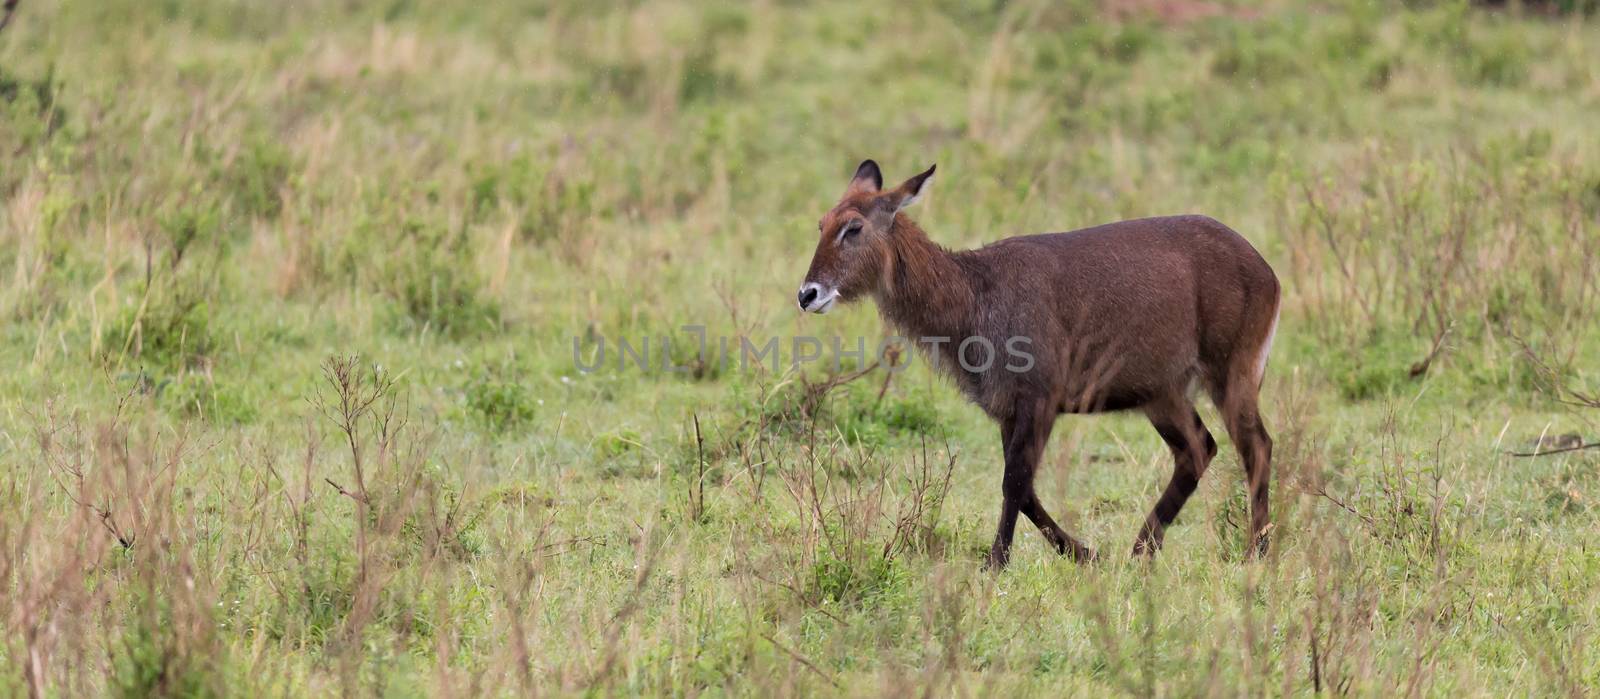 A waterbuck walks in the grass through the Kenyan countryside by 25ehaag6